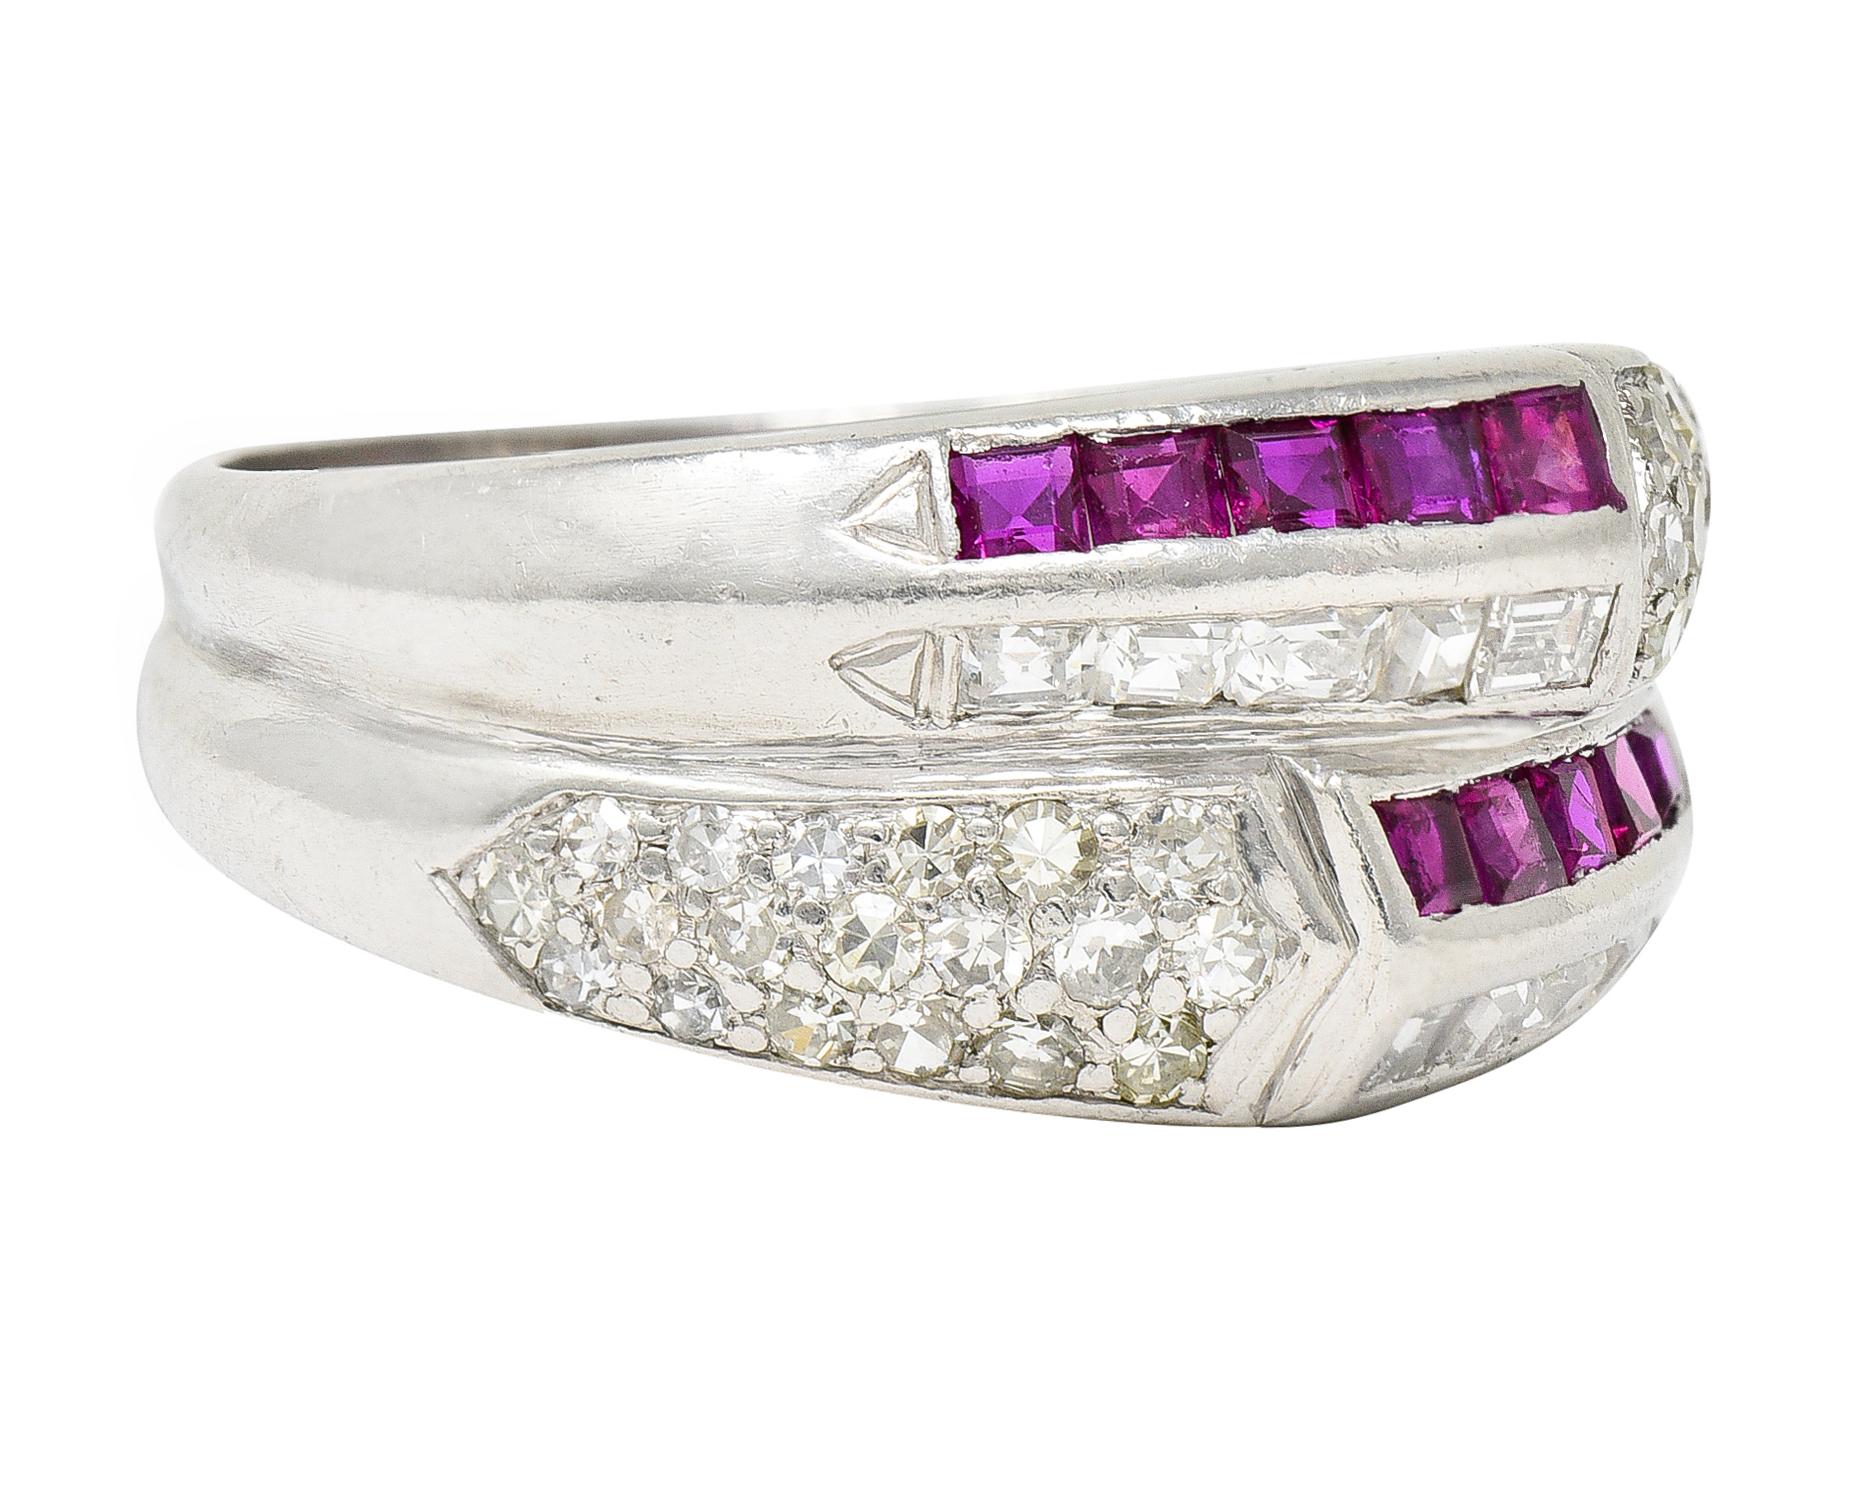 Ring is designed as two fused and deeply ridged band rings. With two rows of channel set square cut rubies. Well matched in purple red color while weighing approximately 0.60 carat total. Contrasting two rows of channel set step cut diamonds.